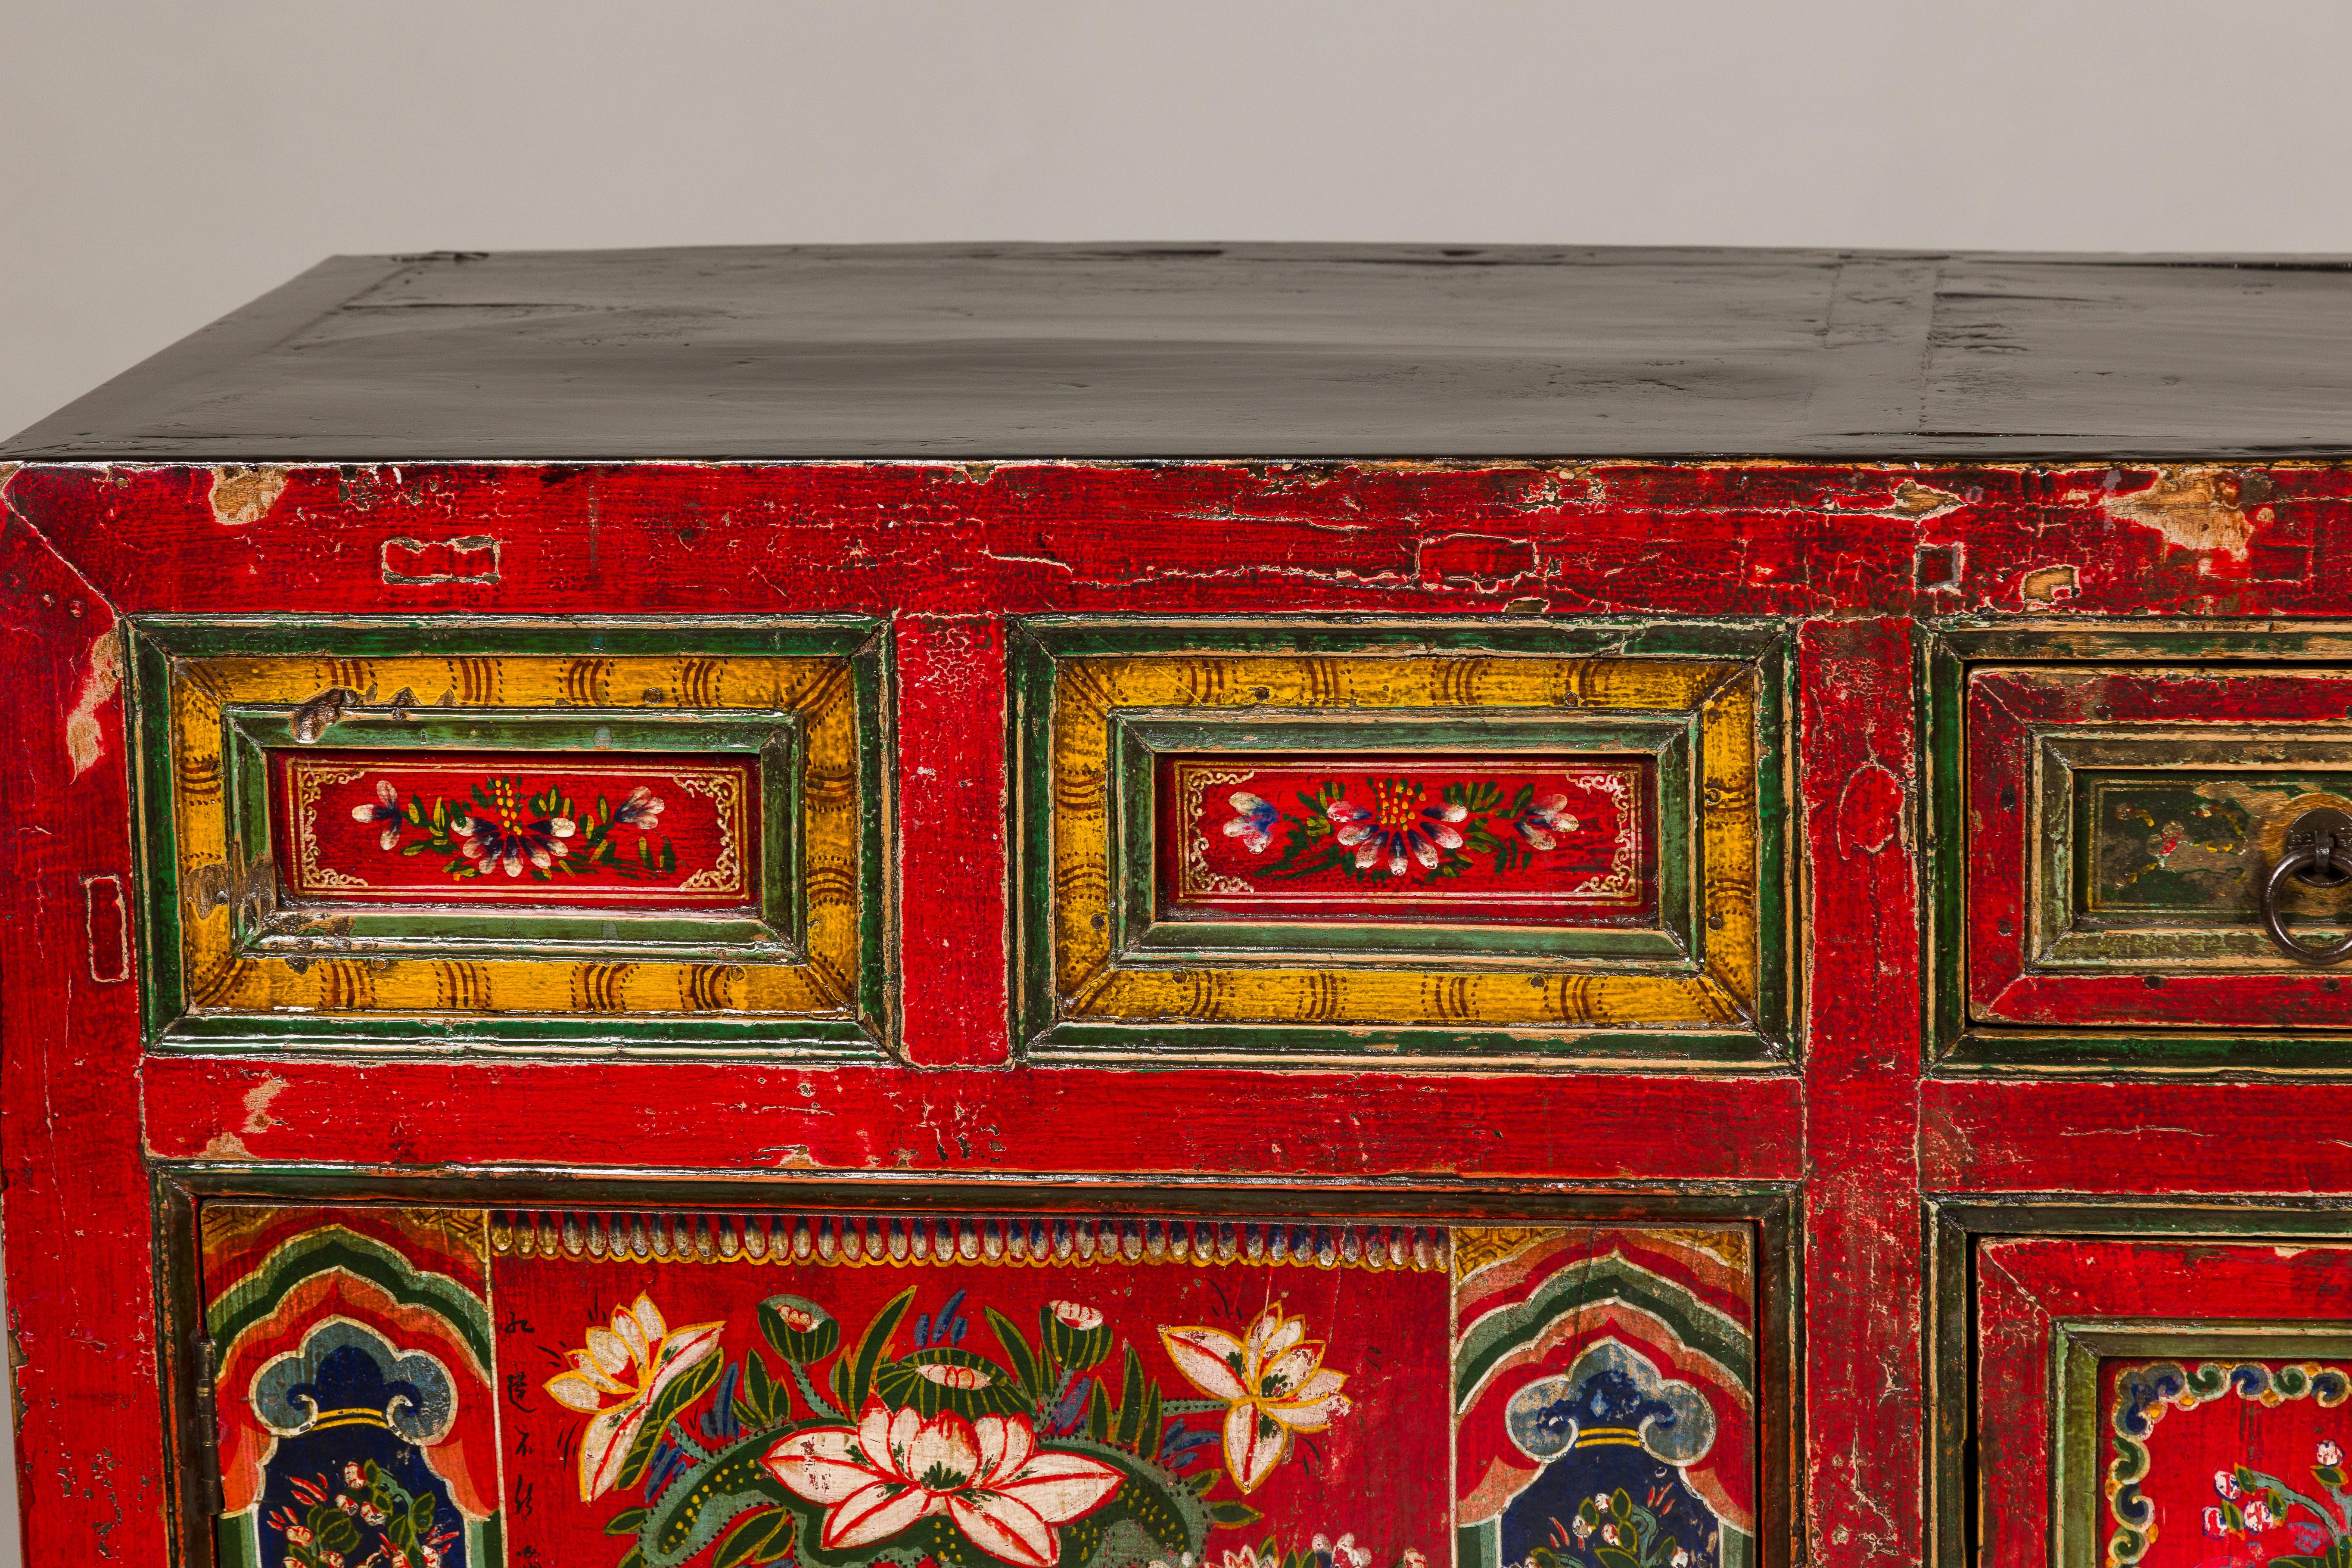 19th Century Mongolian Polychrome Sideboard with Doors, Drawers and Floral Décor 4